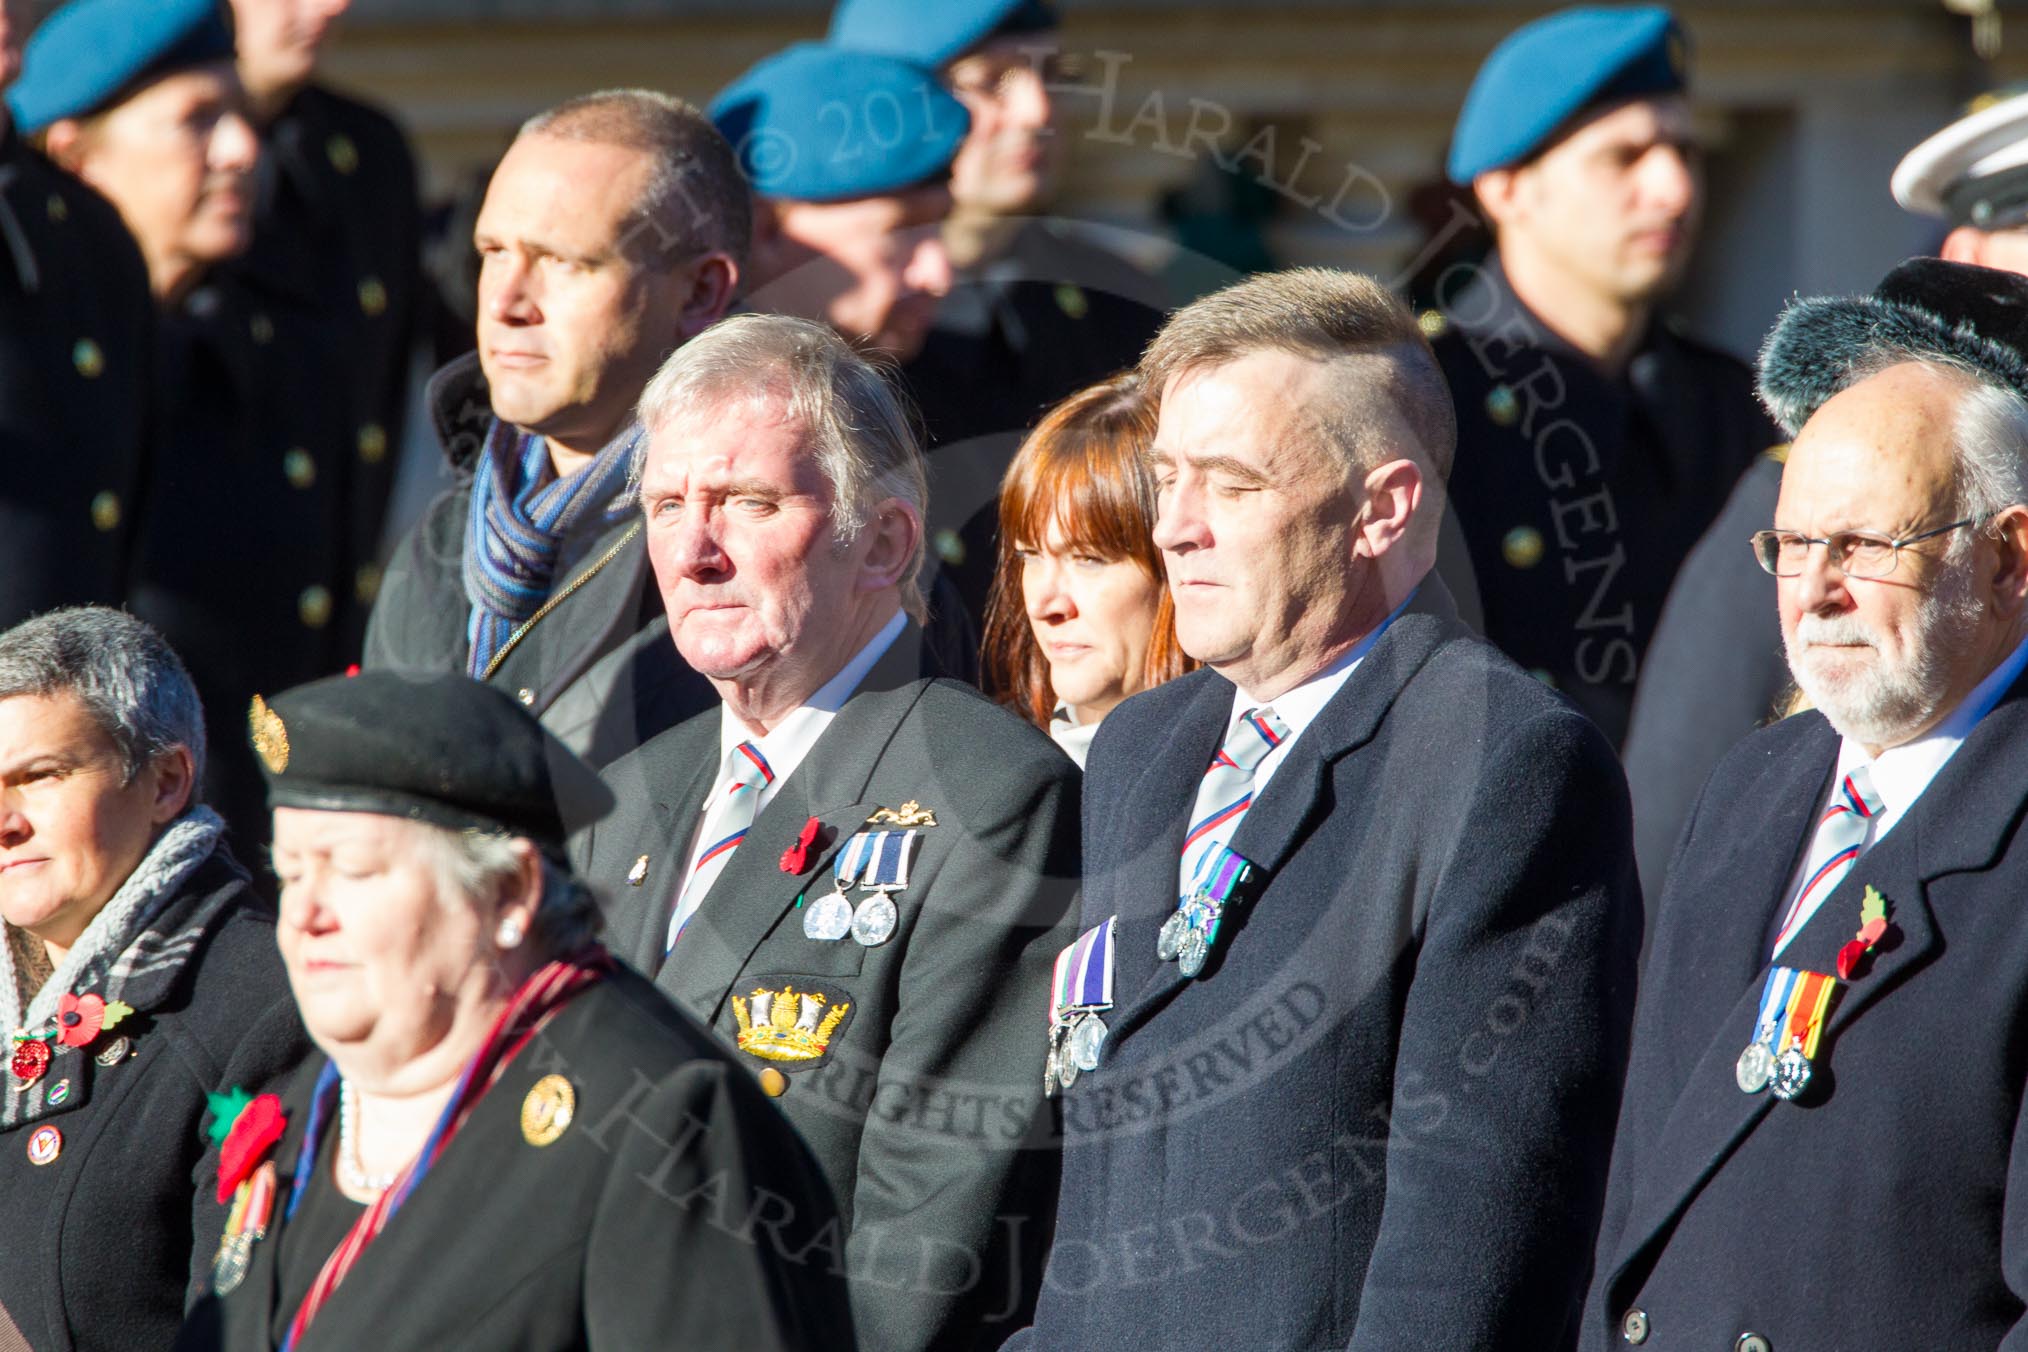 Remembrance Sunday Cenotaph March Past 2013: F6 - Monte Cassino Society..
Press stand opposite the Foreign Office building, Whitehall, London SW1,
London,
Greater London,
United Kingdom,
on 10 November 2013 at 11:50, image #791